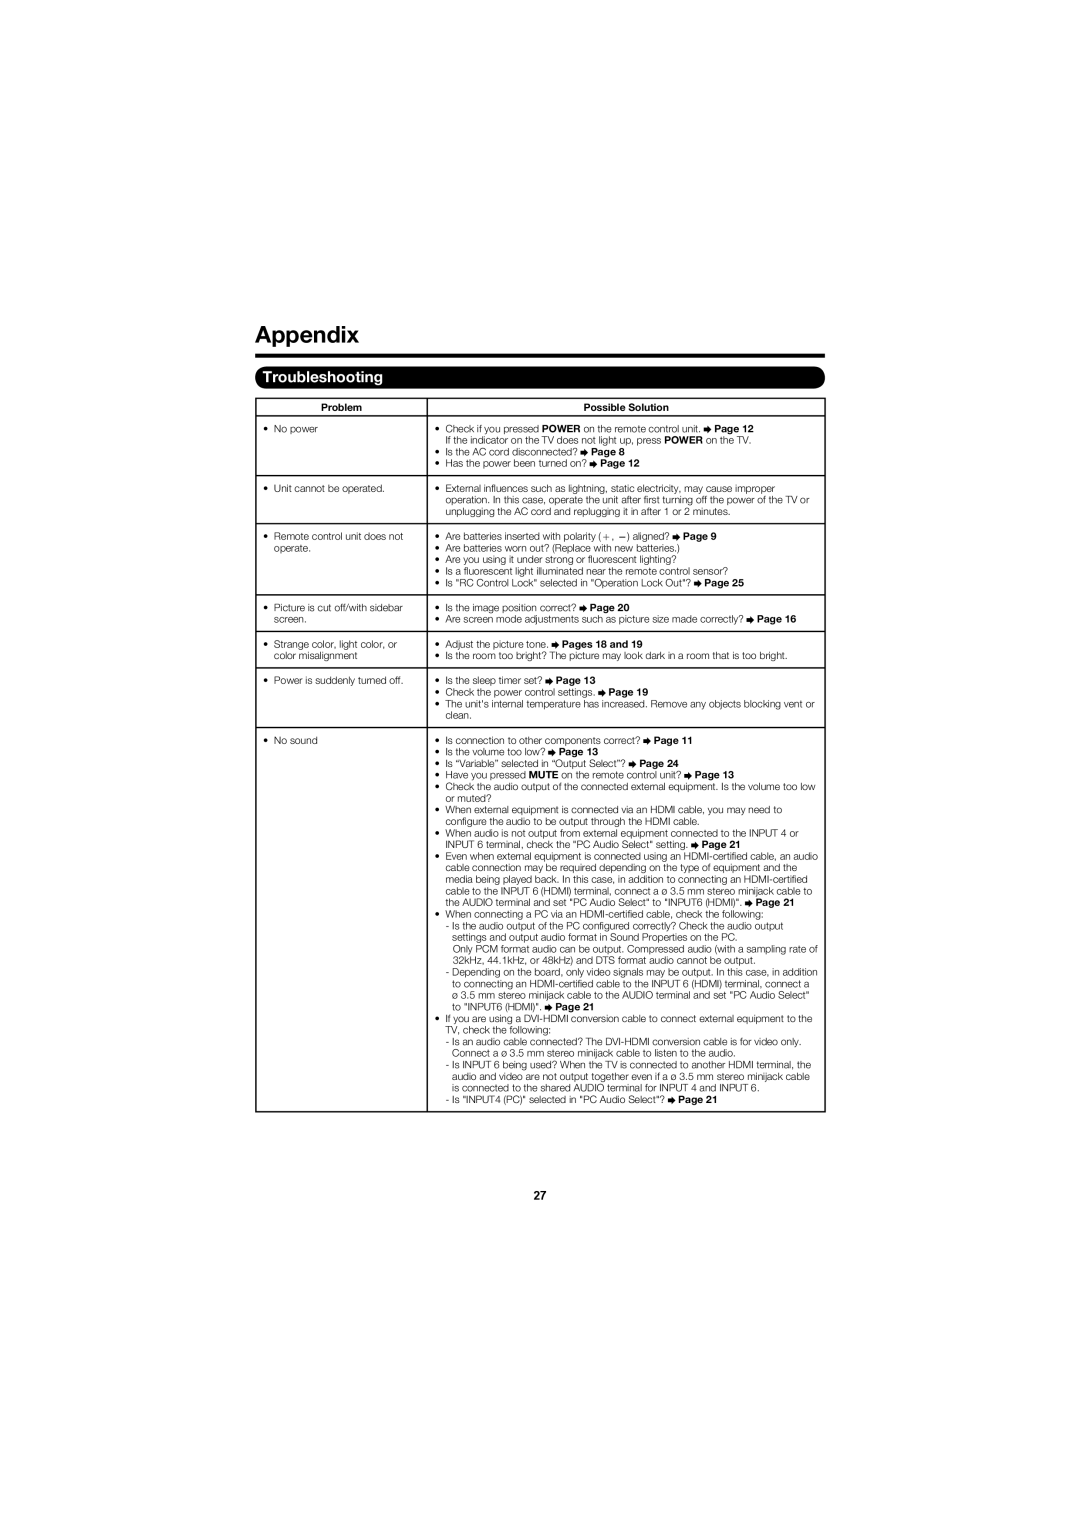 Sharp LC-40D78UN operation manual Appendix, Troubleshooting, Problem, Possible Solution, No power, Pages 18 and 